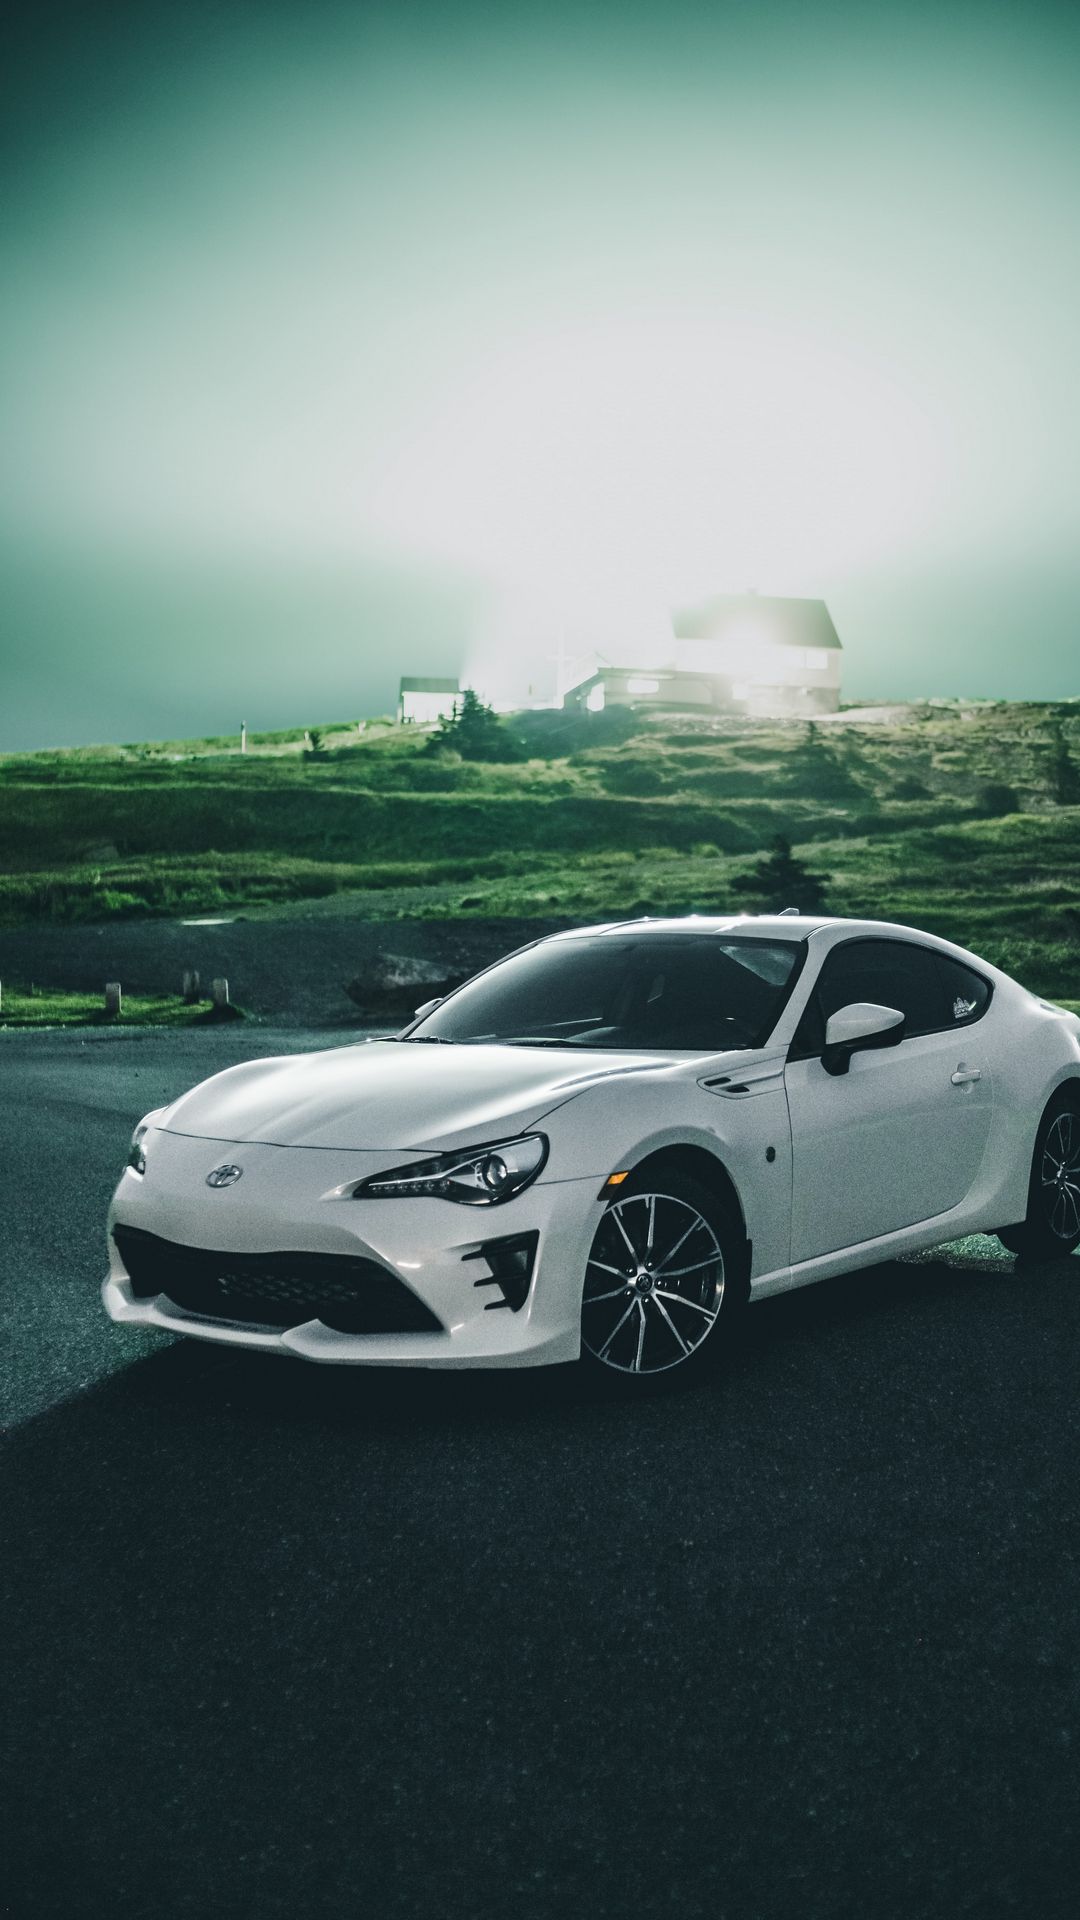 Toyota Car Wallpaper - Free Wallpapers for iPhone, Android, Desktop & Phone